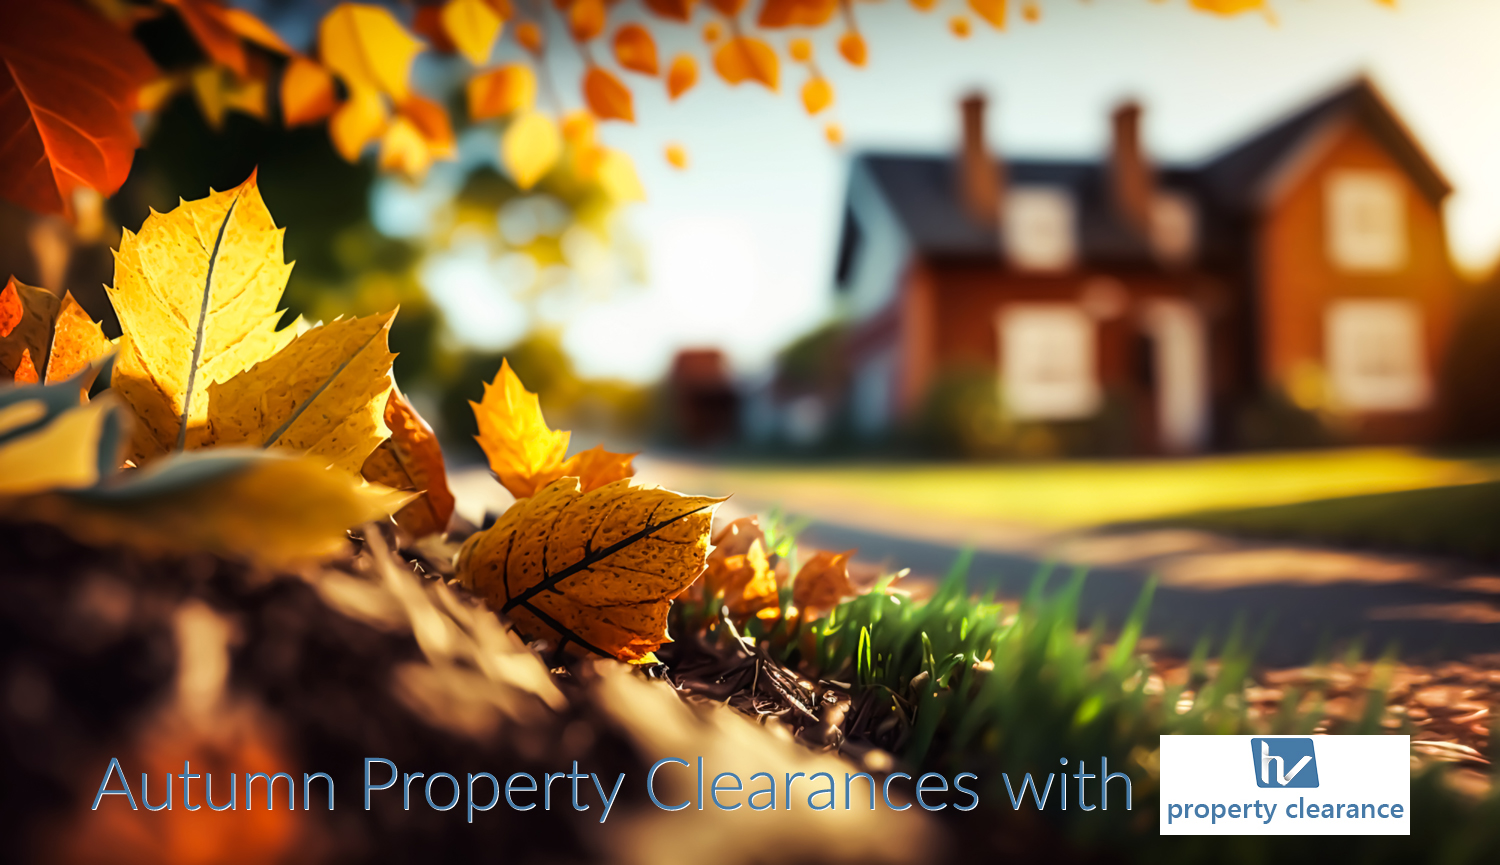 Autumn Property Clearances with HV Property Clearance